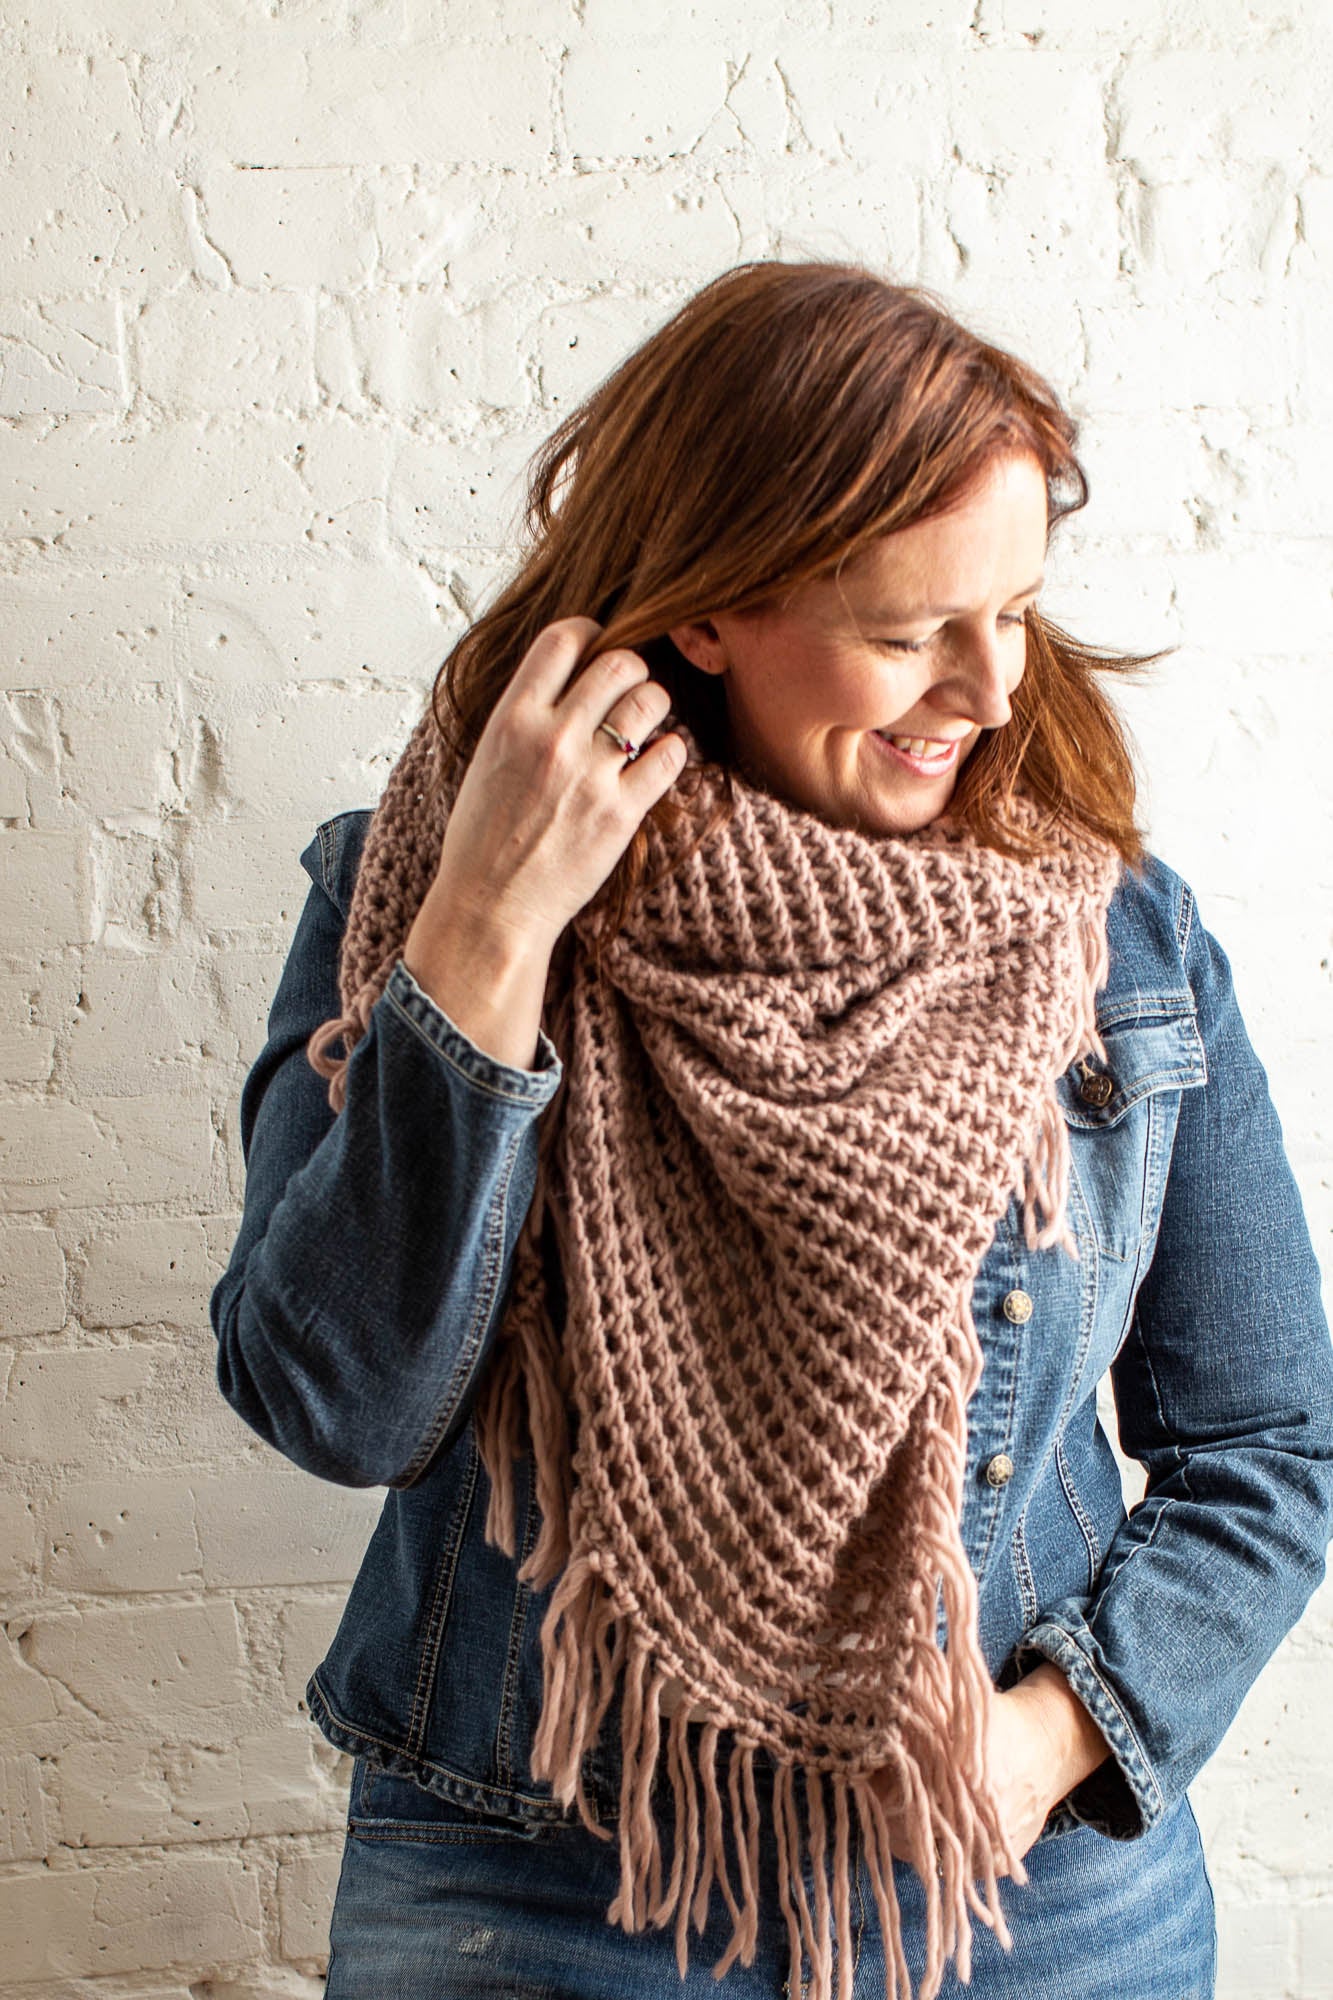 Make the Ranta Scarf by We Are Knitters